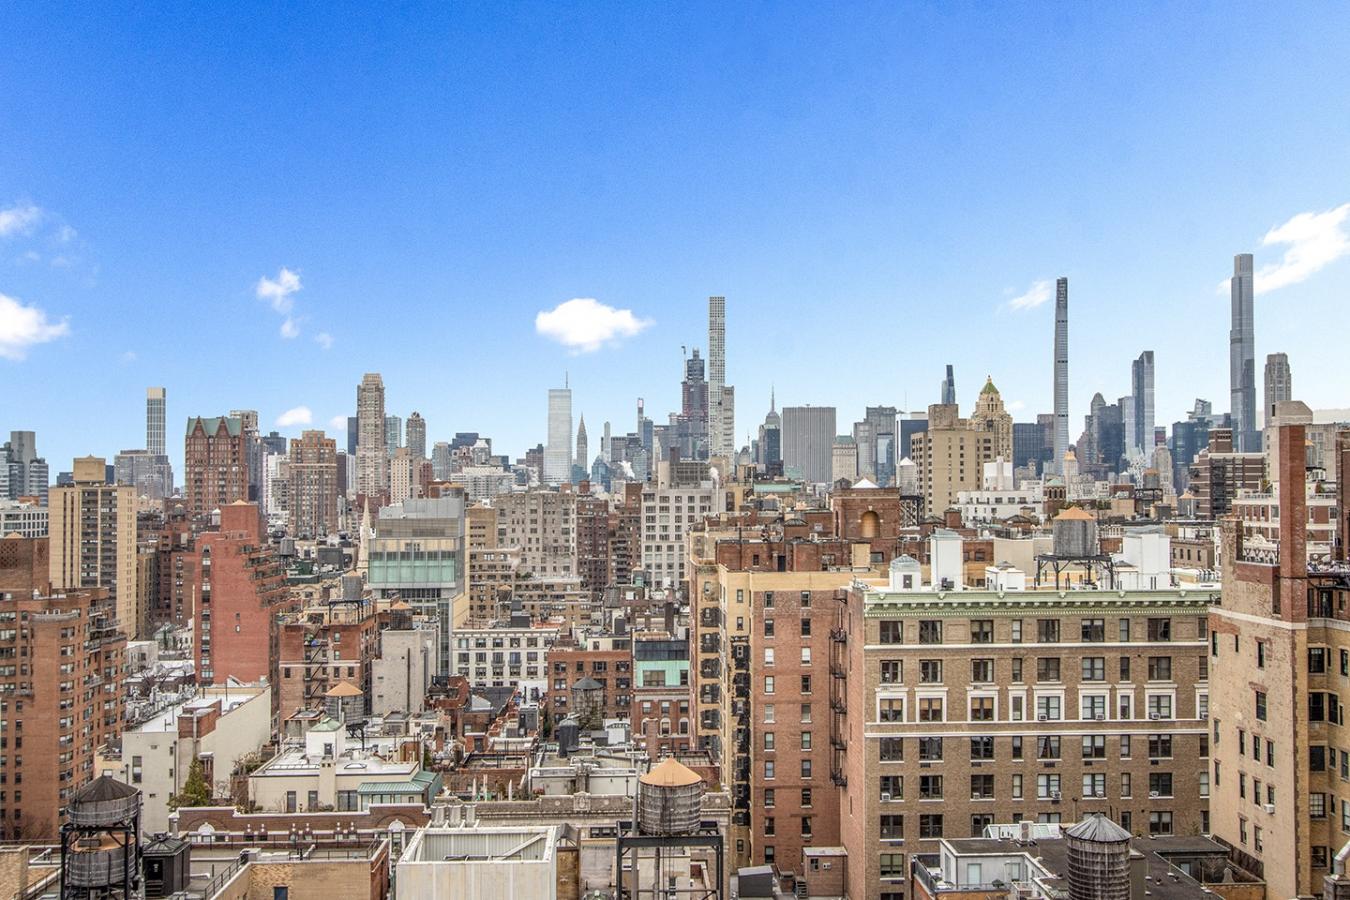 111 EAST 85TH STREET, New York, New York, 10028, United States, 1 Bedroom Bedrooms, ,1 BathroomBathrooms,Residential,For Sale,111 east 85th ST,1468553